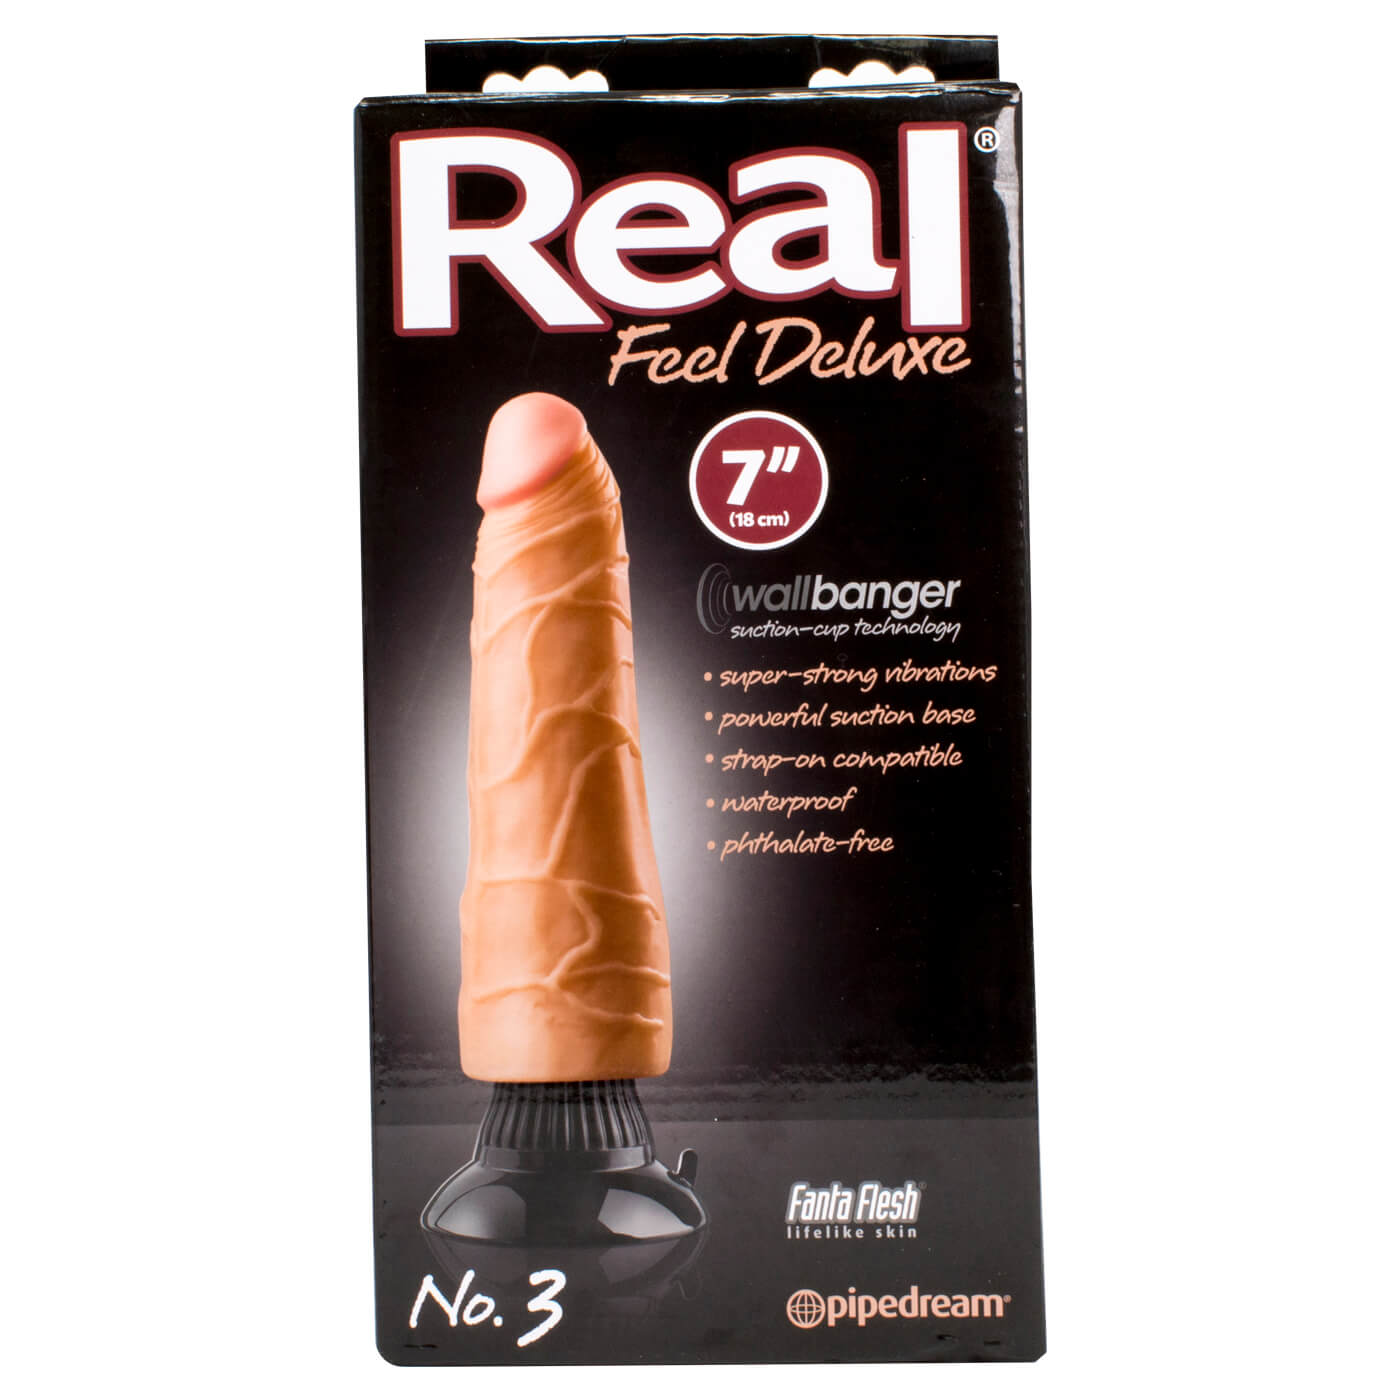 Real Feel Deluxe No.3 Realistic Vibrating 7 Inch Suction Dildo